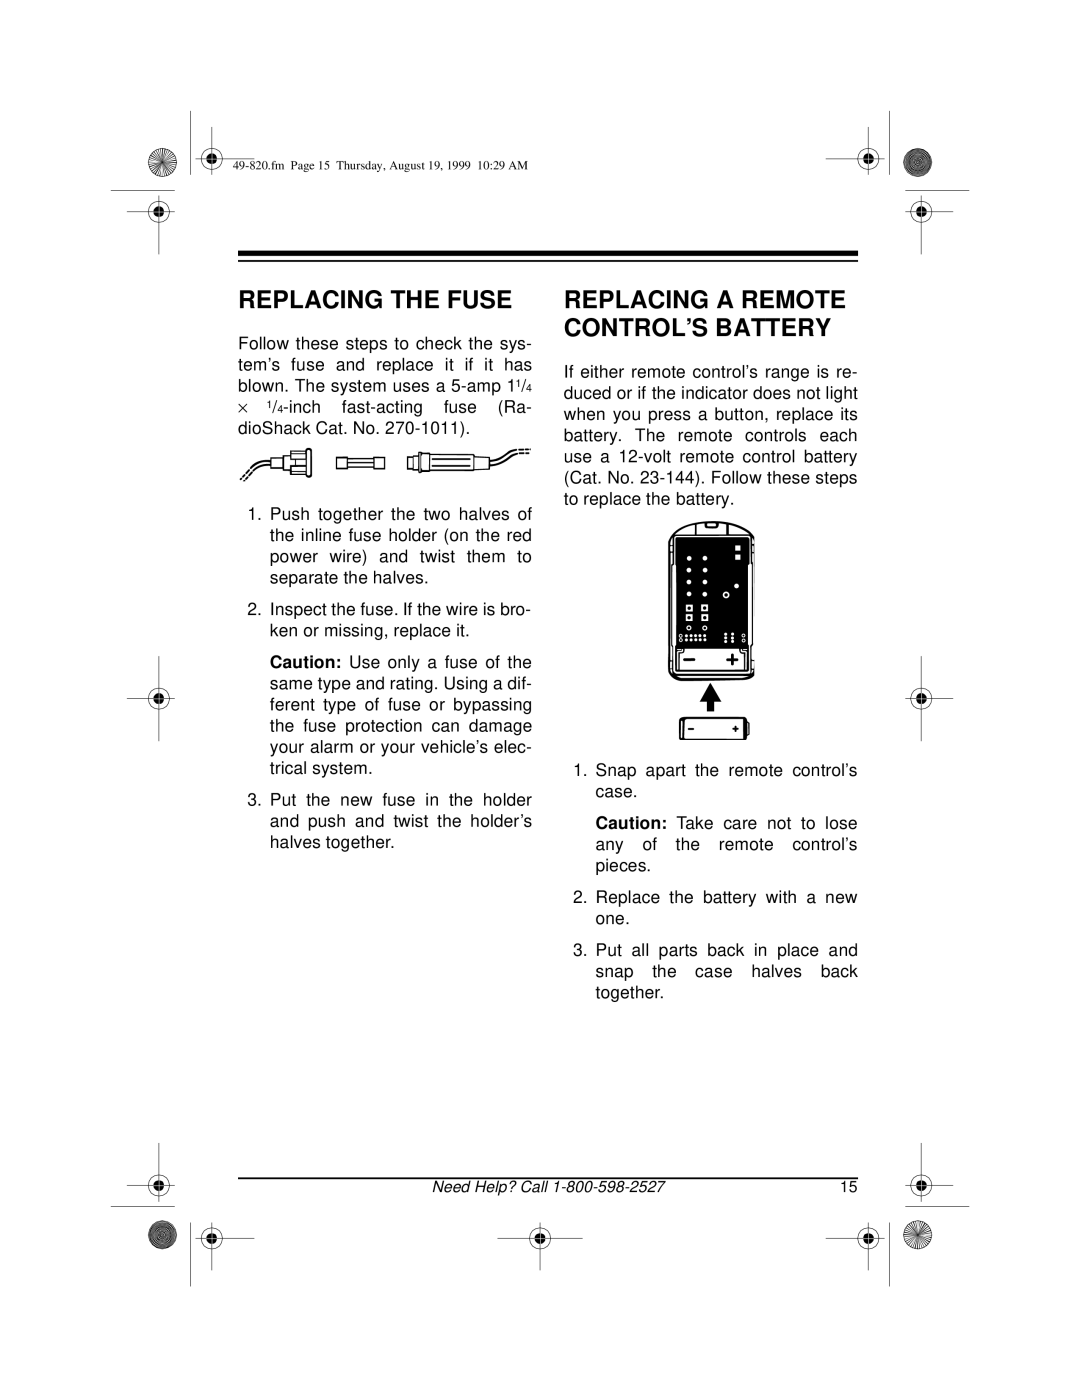 Radio Shack RS-2000 owner manual Replacing The Fuse, Replacing A Remote Control’S Battery 